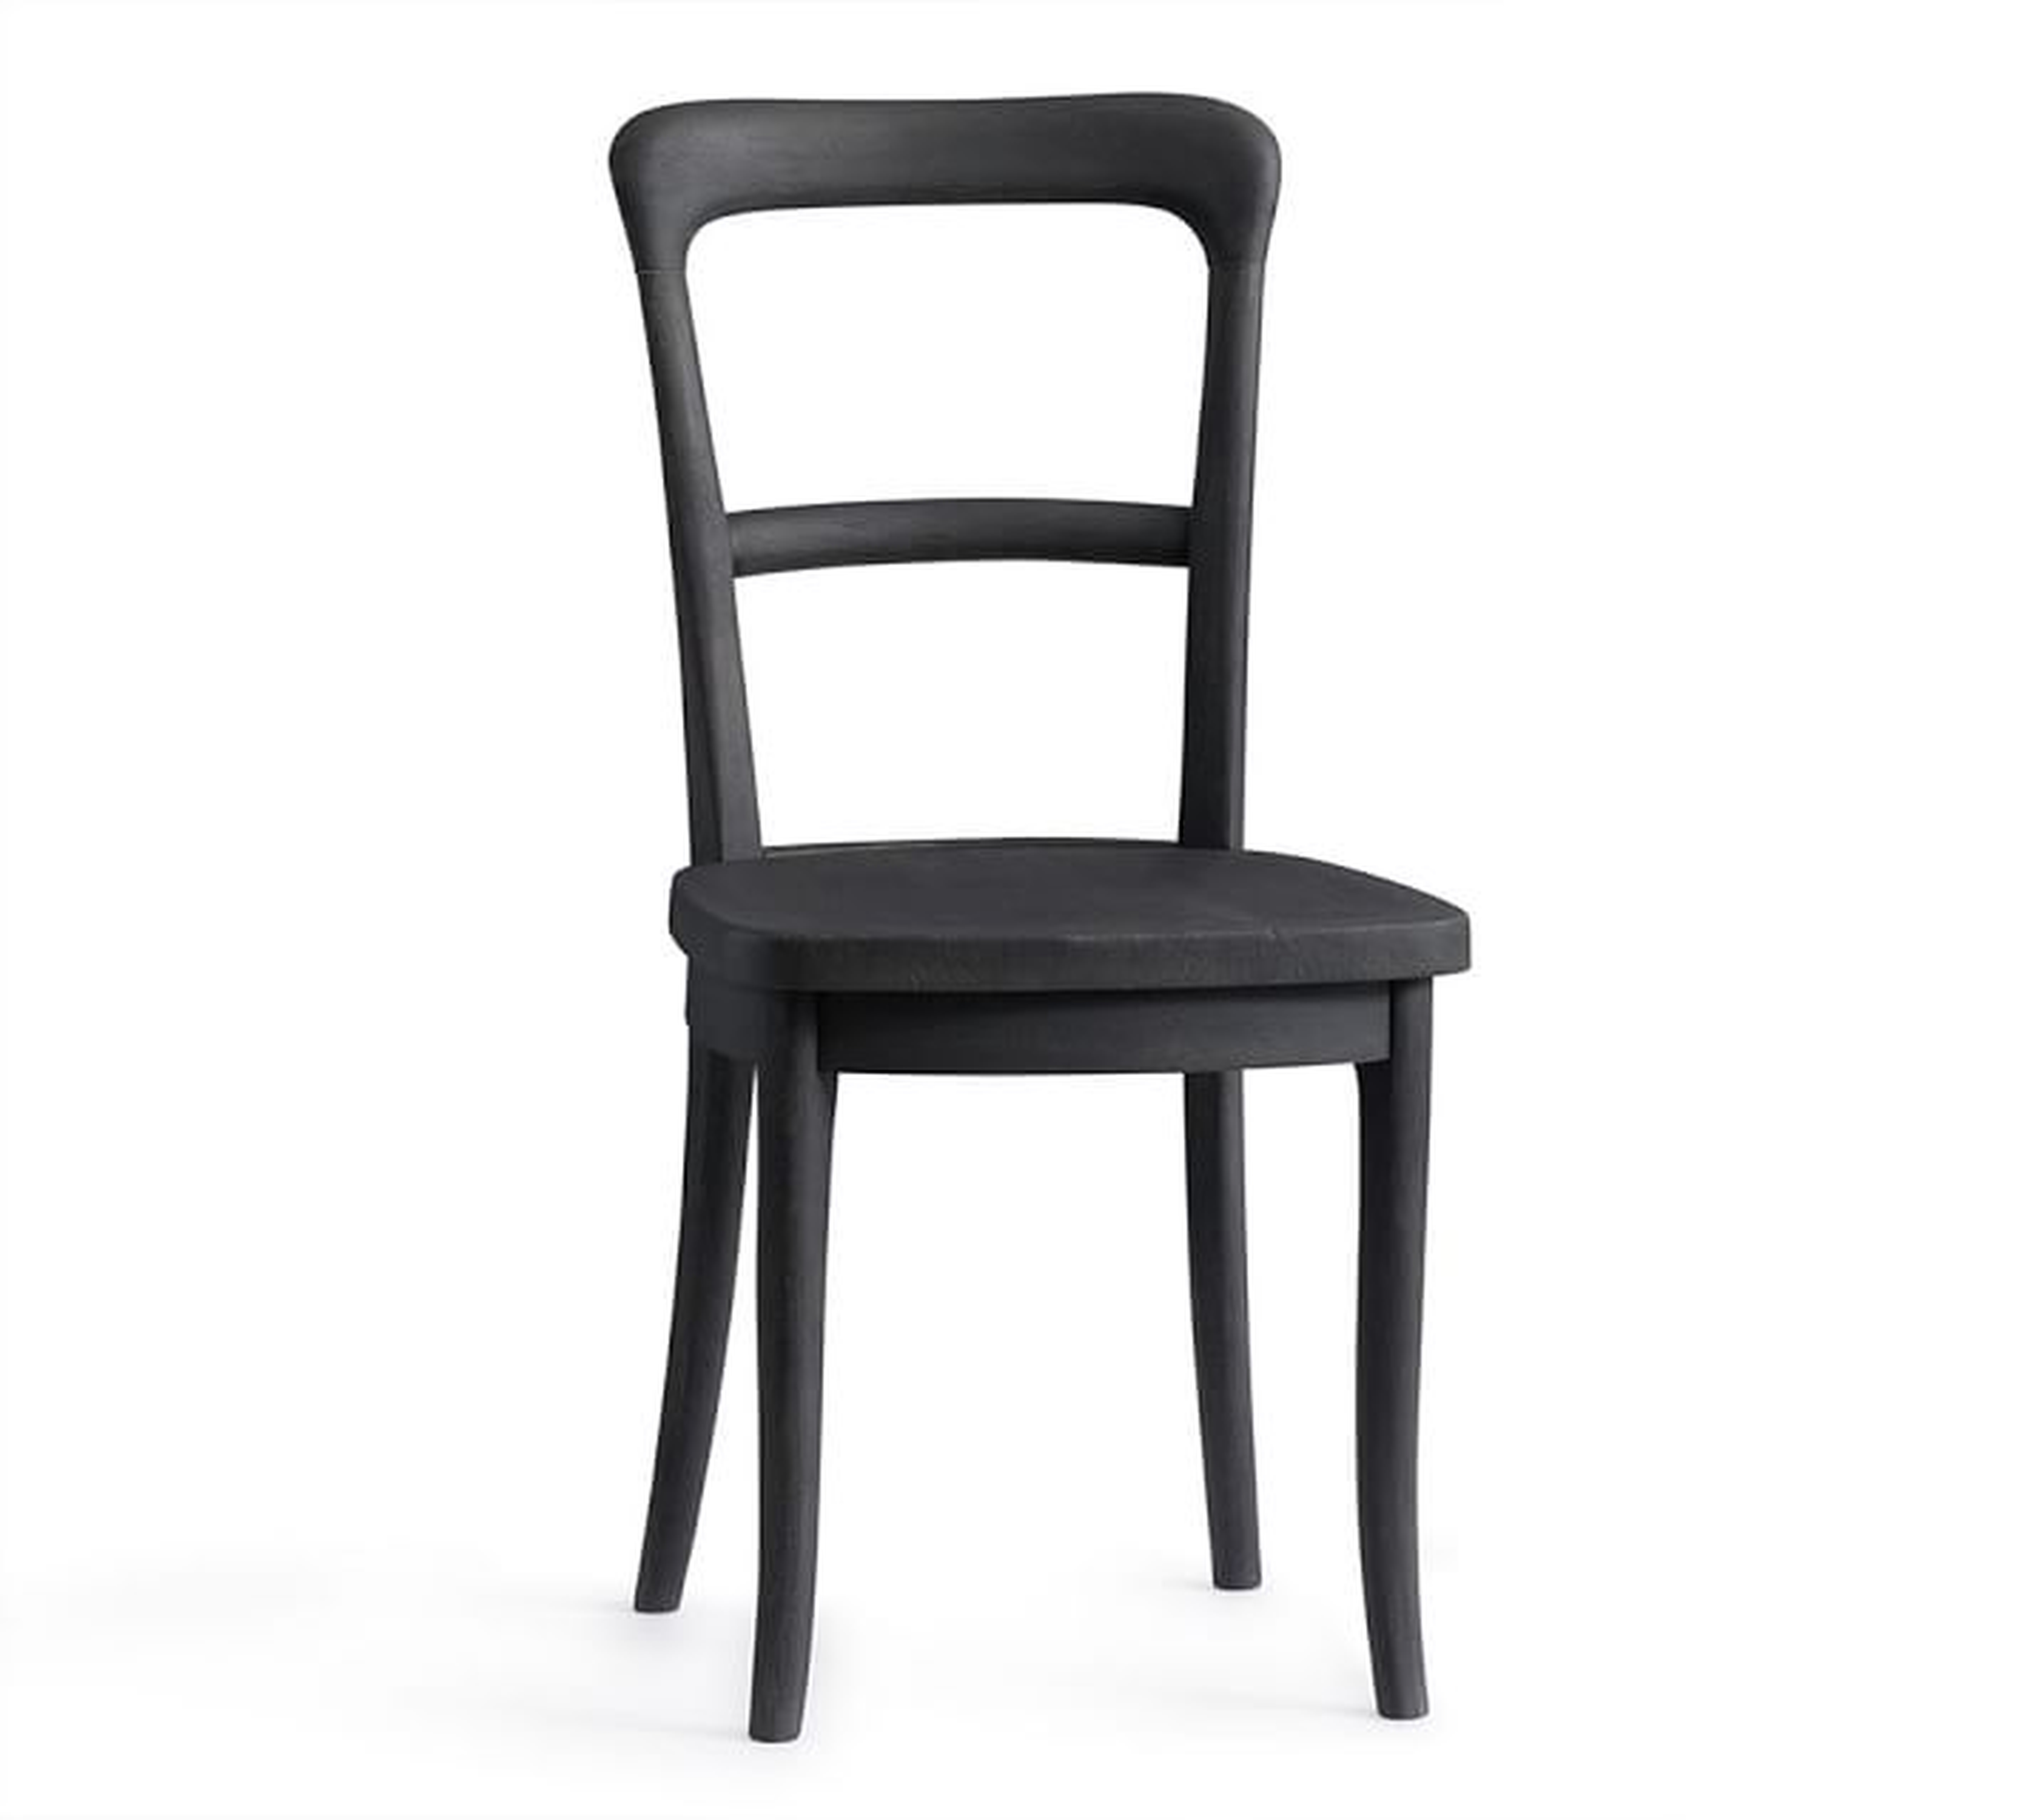 Cline Dining Chair, Charcoal - Pottery Barn